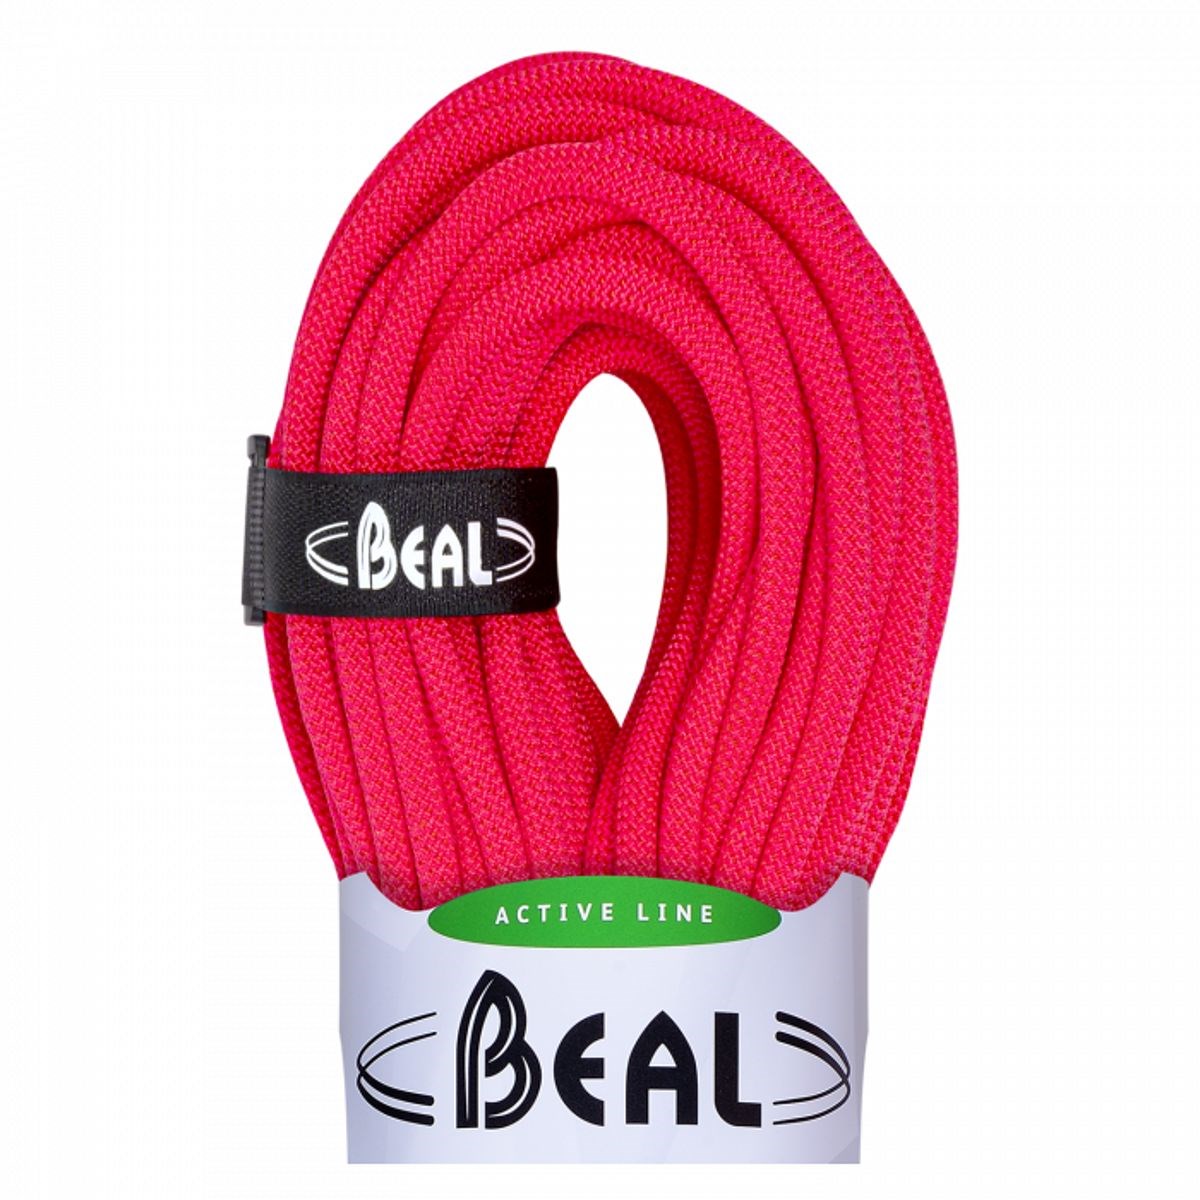 Lano Beal Zenith 9,5 mm Standard solid pink Beal 10025886 L-11